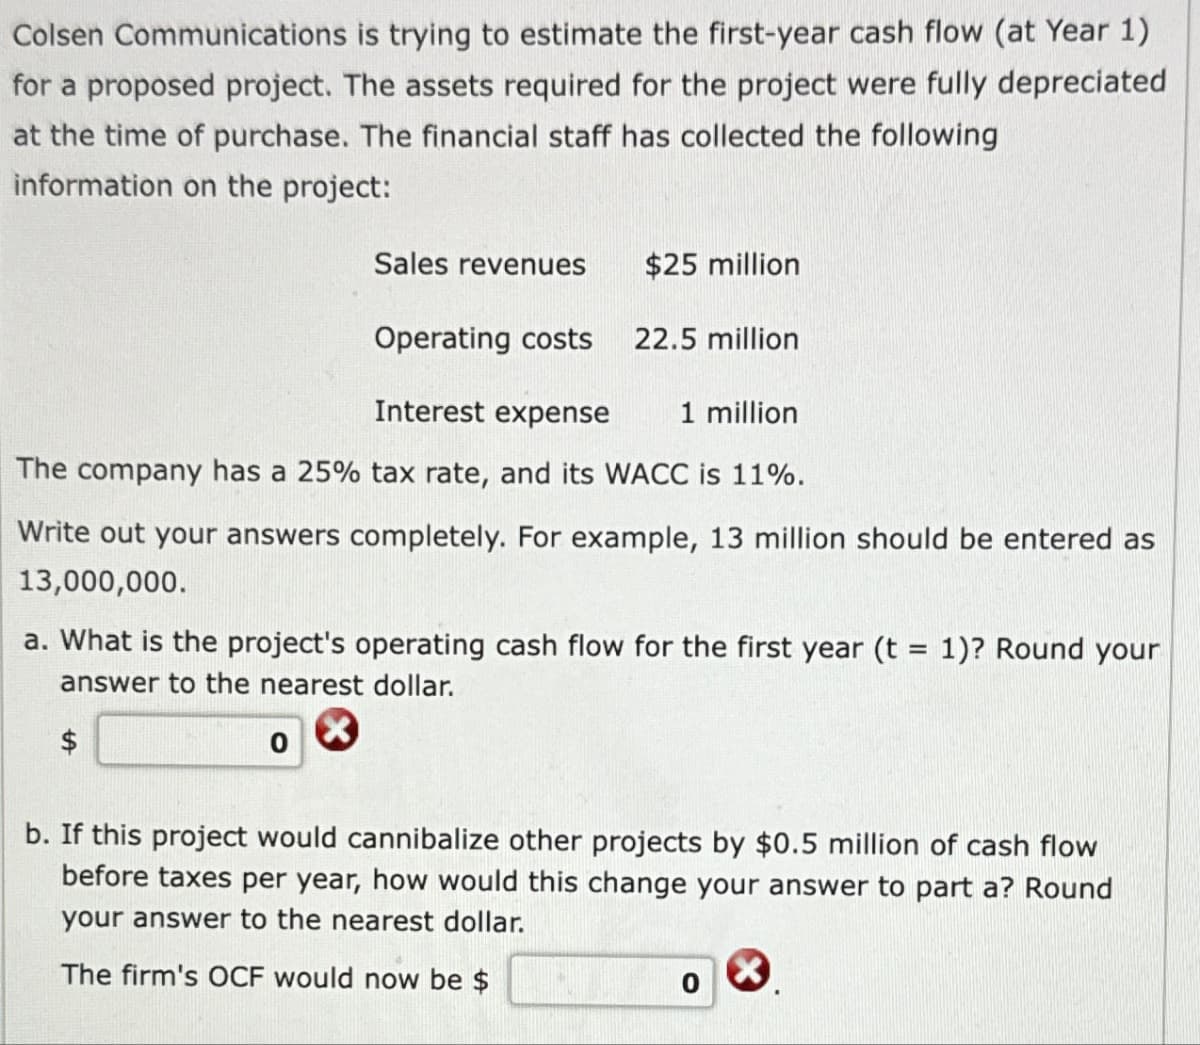 Colsen Communications is trying to estimate the first-year cash flow (at Year 1)
for a proposed project. The assets required for the project were fully depreciated
at the time of purchase. The financial staff has collected the following
information on the project:
Sales revenues
$25 million
Operating costs 22.5 million
Interest expense
1 million
The company has a 25% tax rate, and its WACC is 11%.
Write out your answers completely. For example, 13 million should be entered as
13,000,000.
a. What is the project's operating cash flow for the first year (t = 1)? Round your
answer to the nearest dollar.
$
0
b. If this project would cannibalize other projects by $0.5 million of cash flow
before taxes per year, how would this change your answer to part a? Round
your answer to the nearest dollar.
The firm's OCF would now be $
0